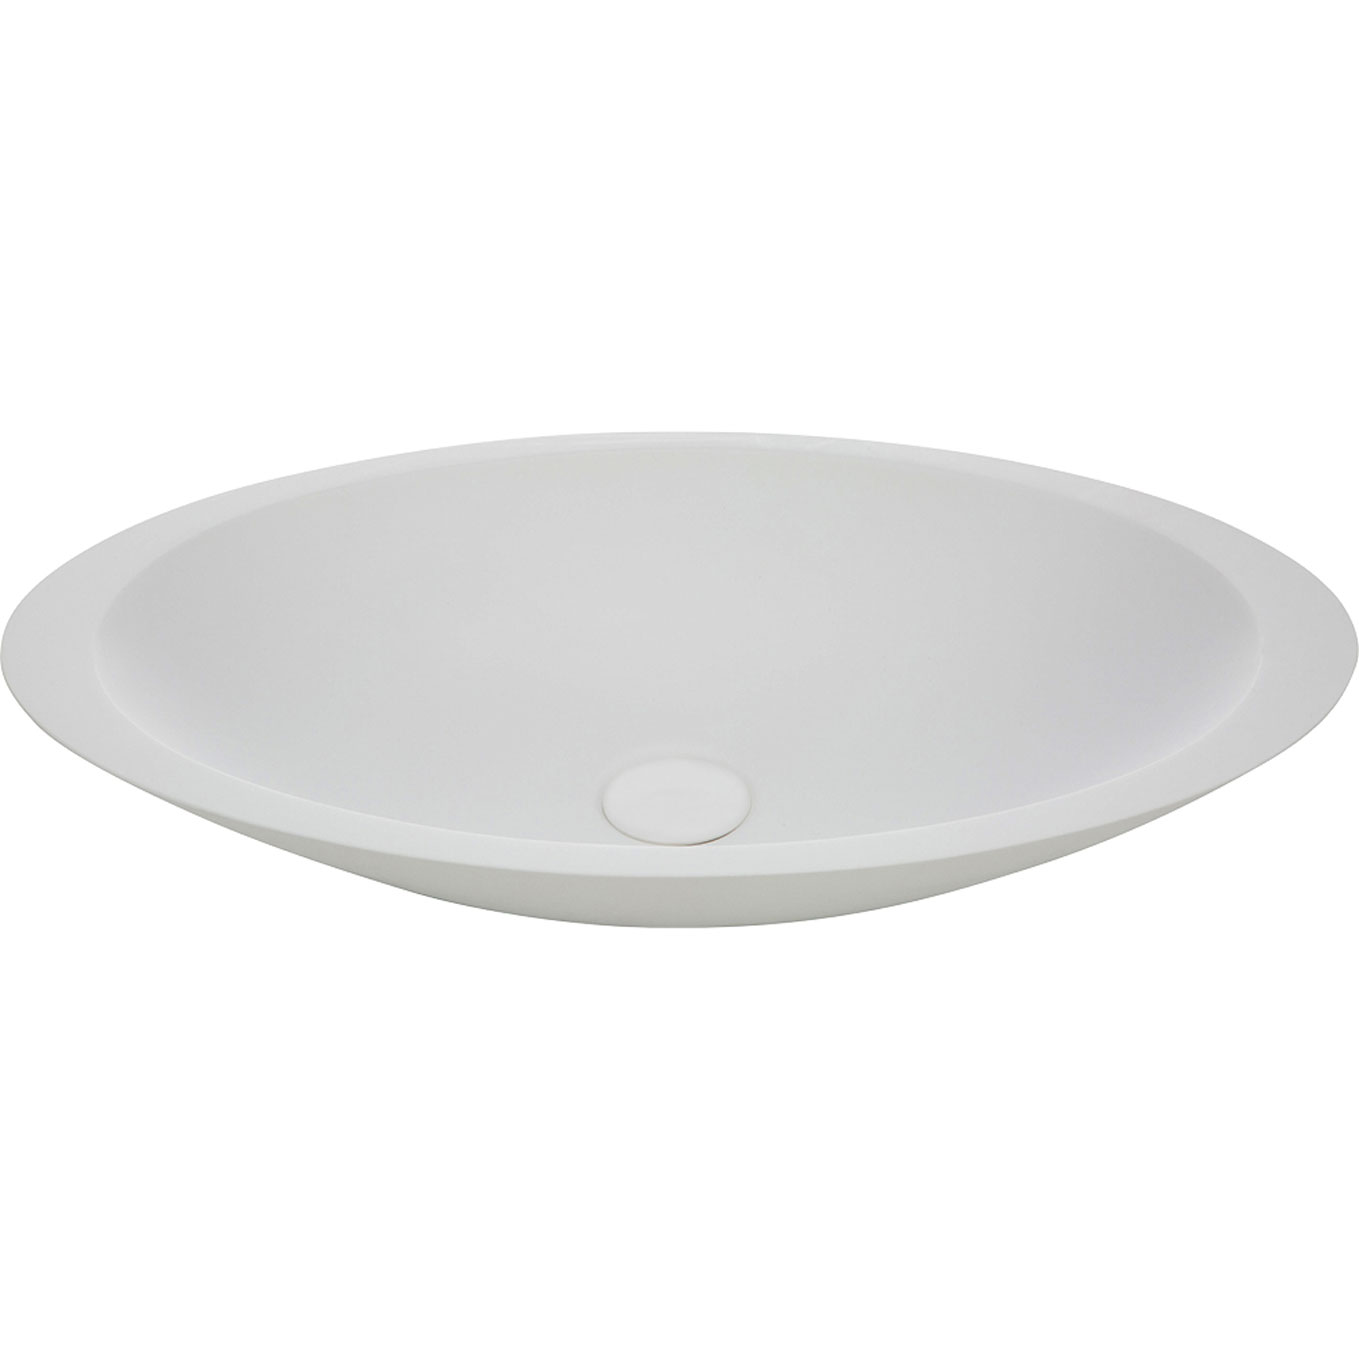 FIENZA CSB01 BAHAMA SOLID SURFACE OVAL ABOVE COUNTER BASIN MATTE WHITE